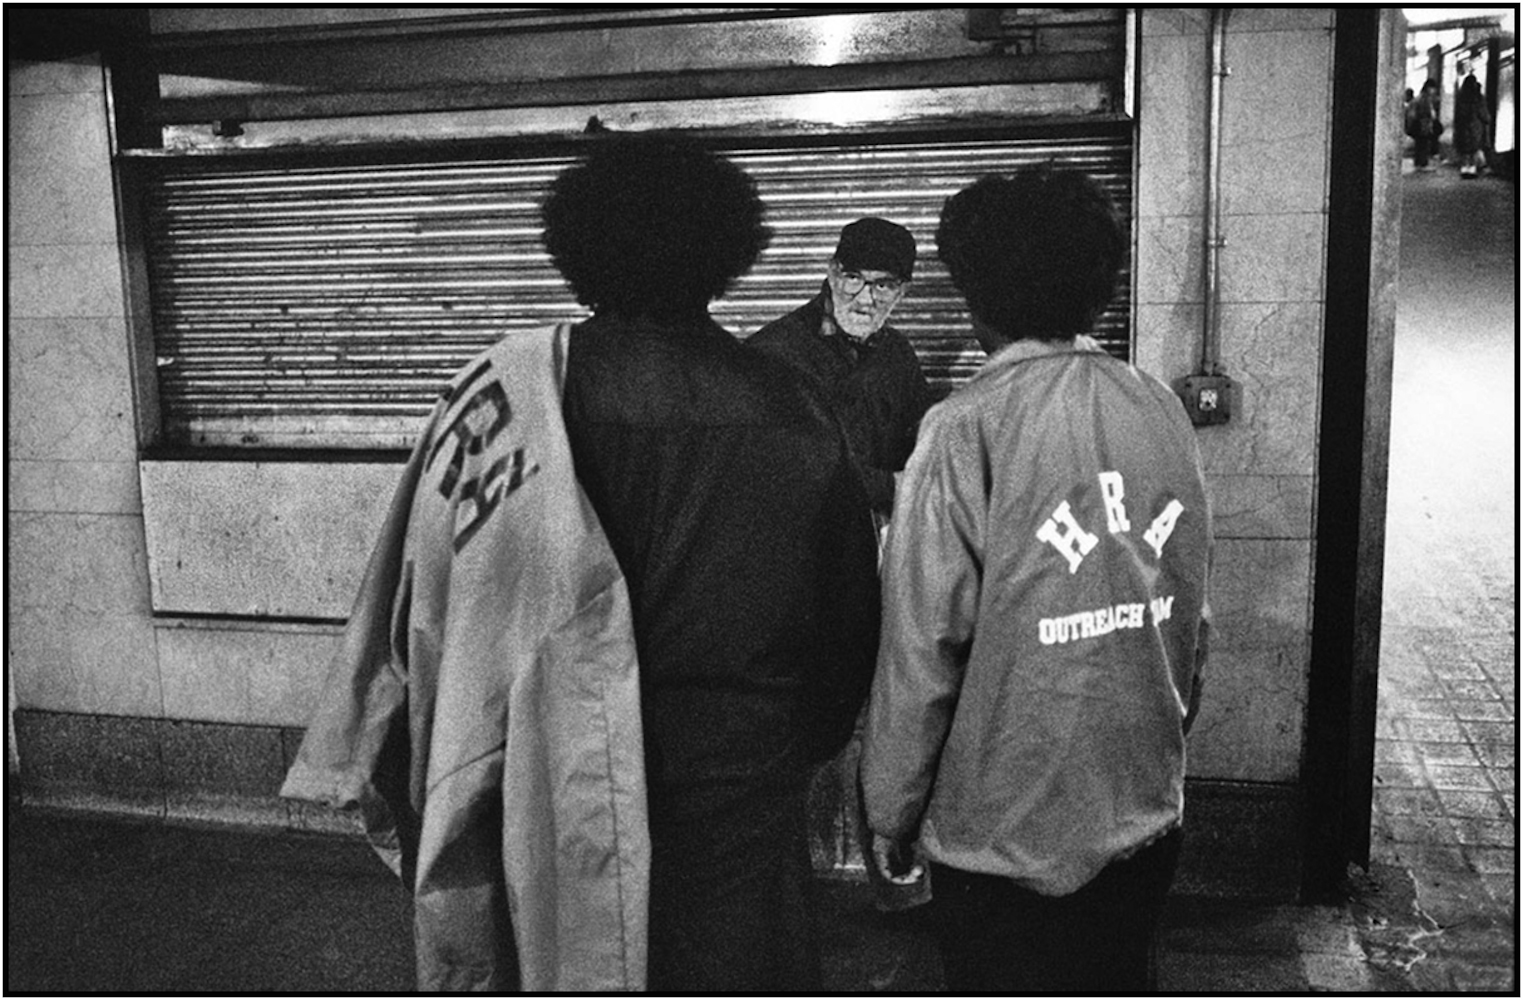   Human Resources Administration workers reach out to homeless man at Grand Central Terminal, Manhattan.&nbsp;1989.  